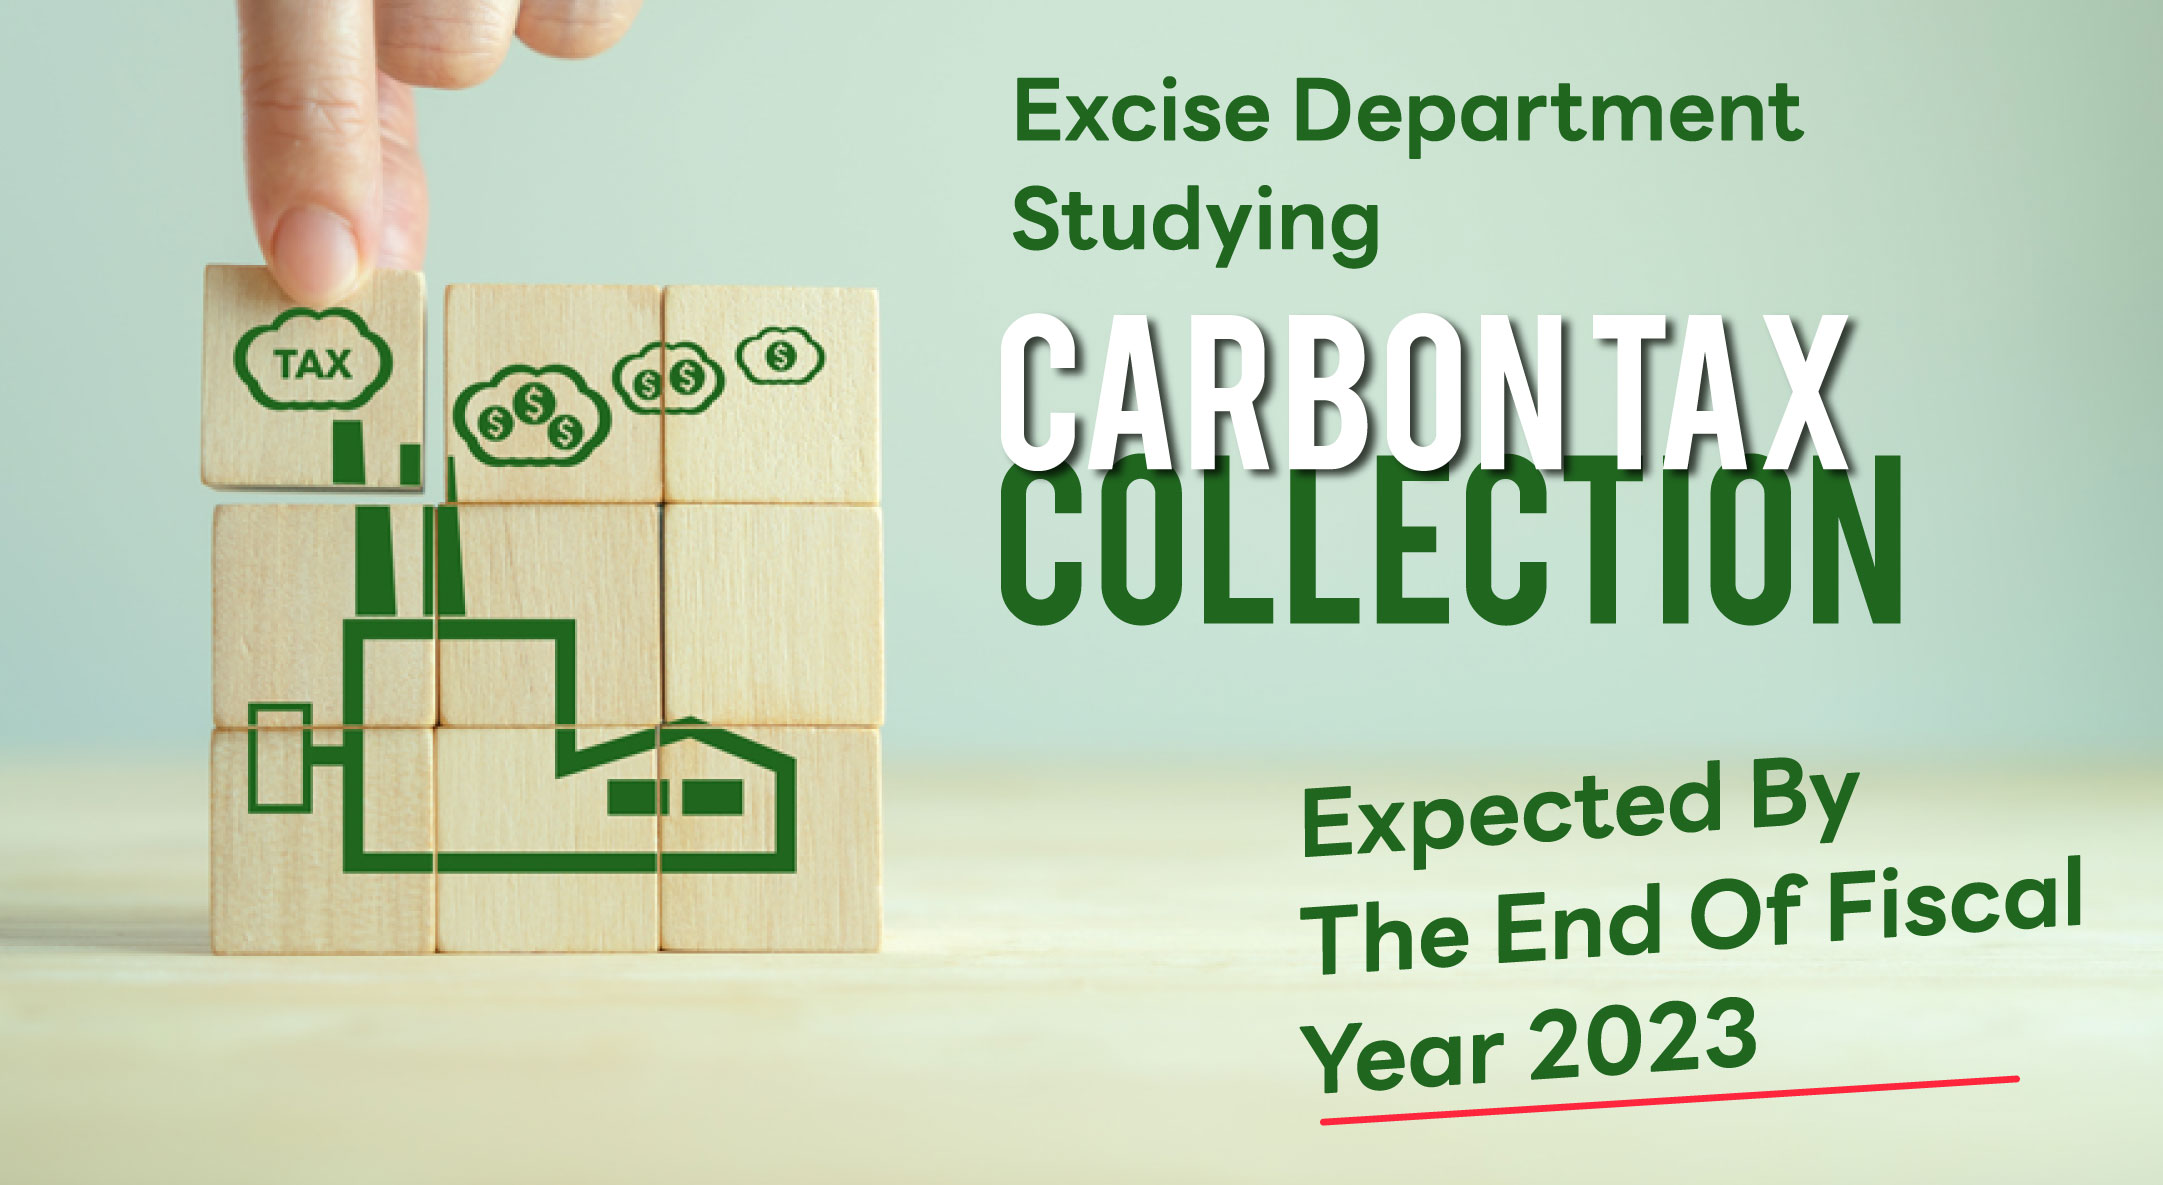 EXCISE DEPARTMENT STUDYING CARBON TAX COLLECTION EXPECTED BY THE END OF FISCAL YEAR 2023